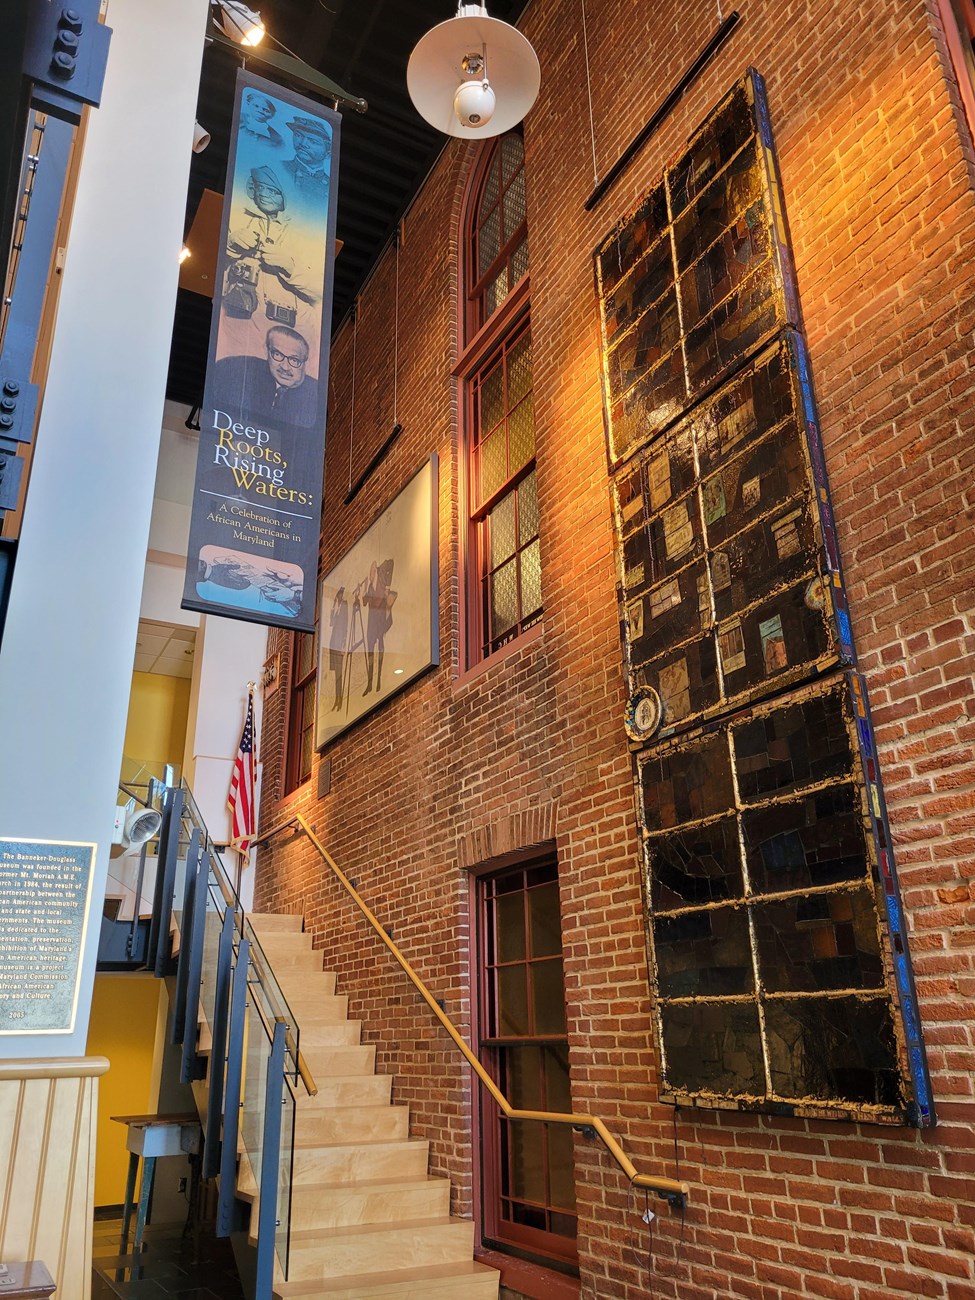 Photograph of brick building inside a more modern building. Stairs transcend underneath a banner with text that reads "Deep Roots, Rising Waters."